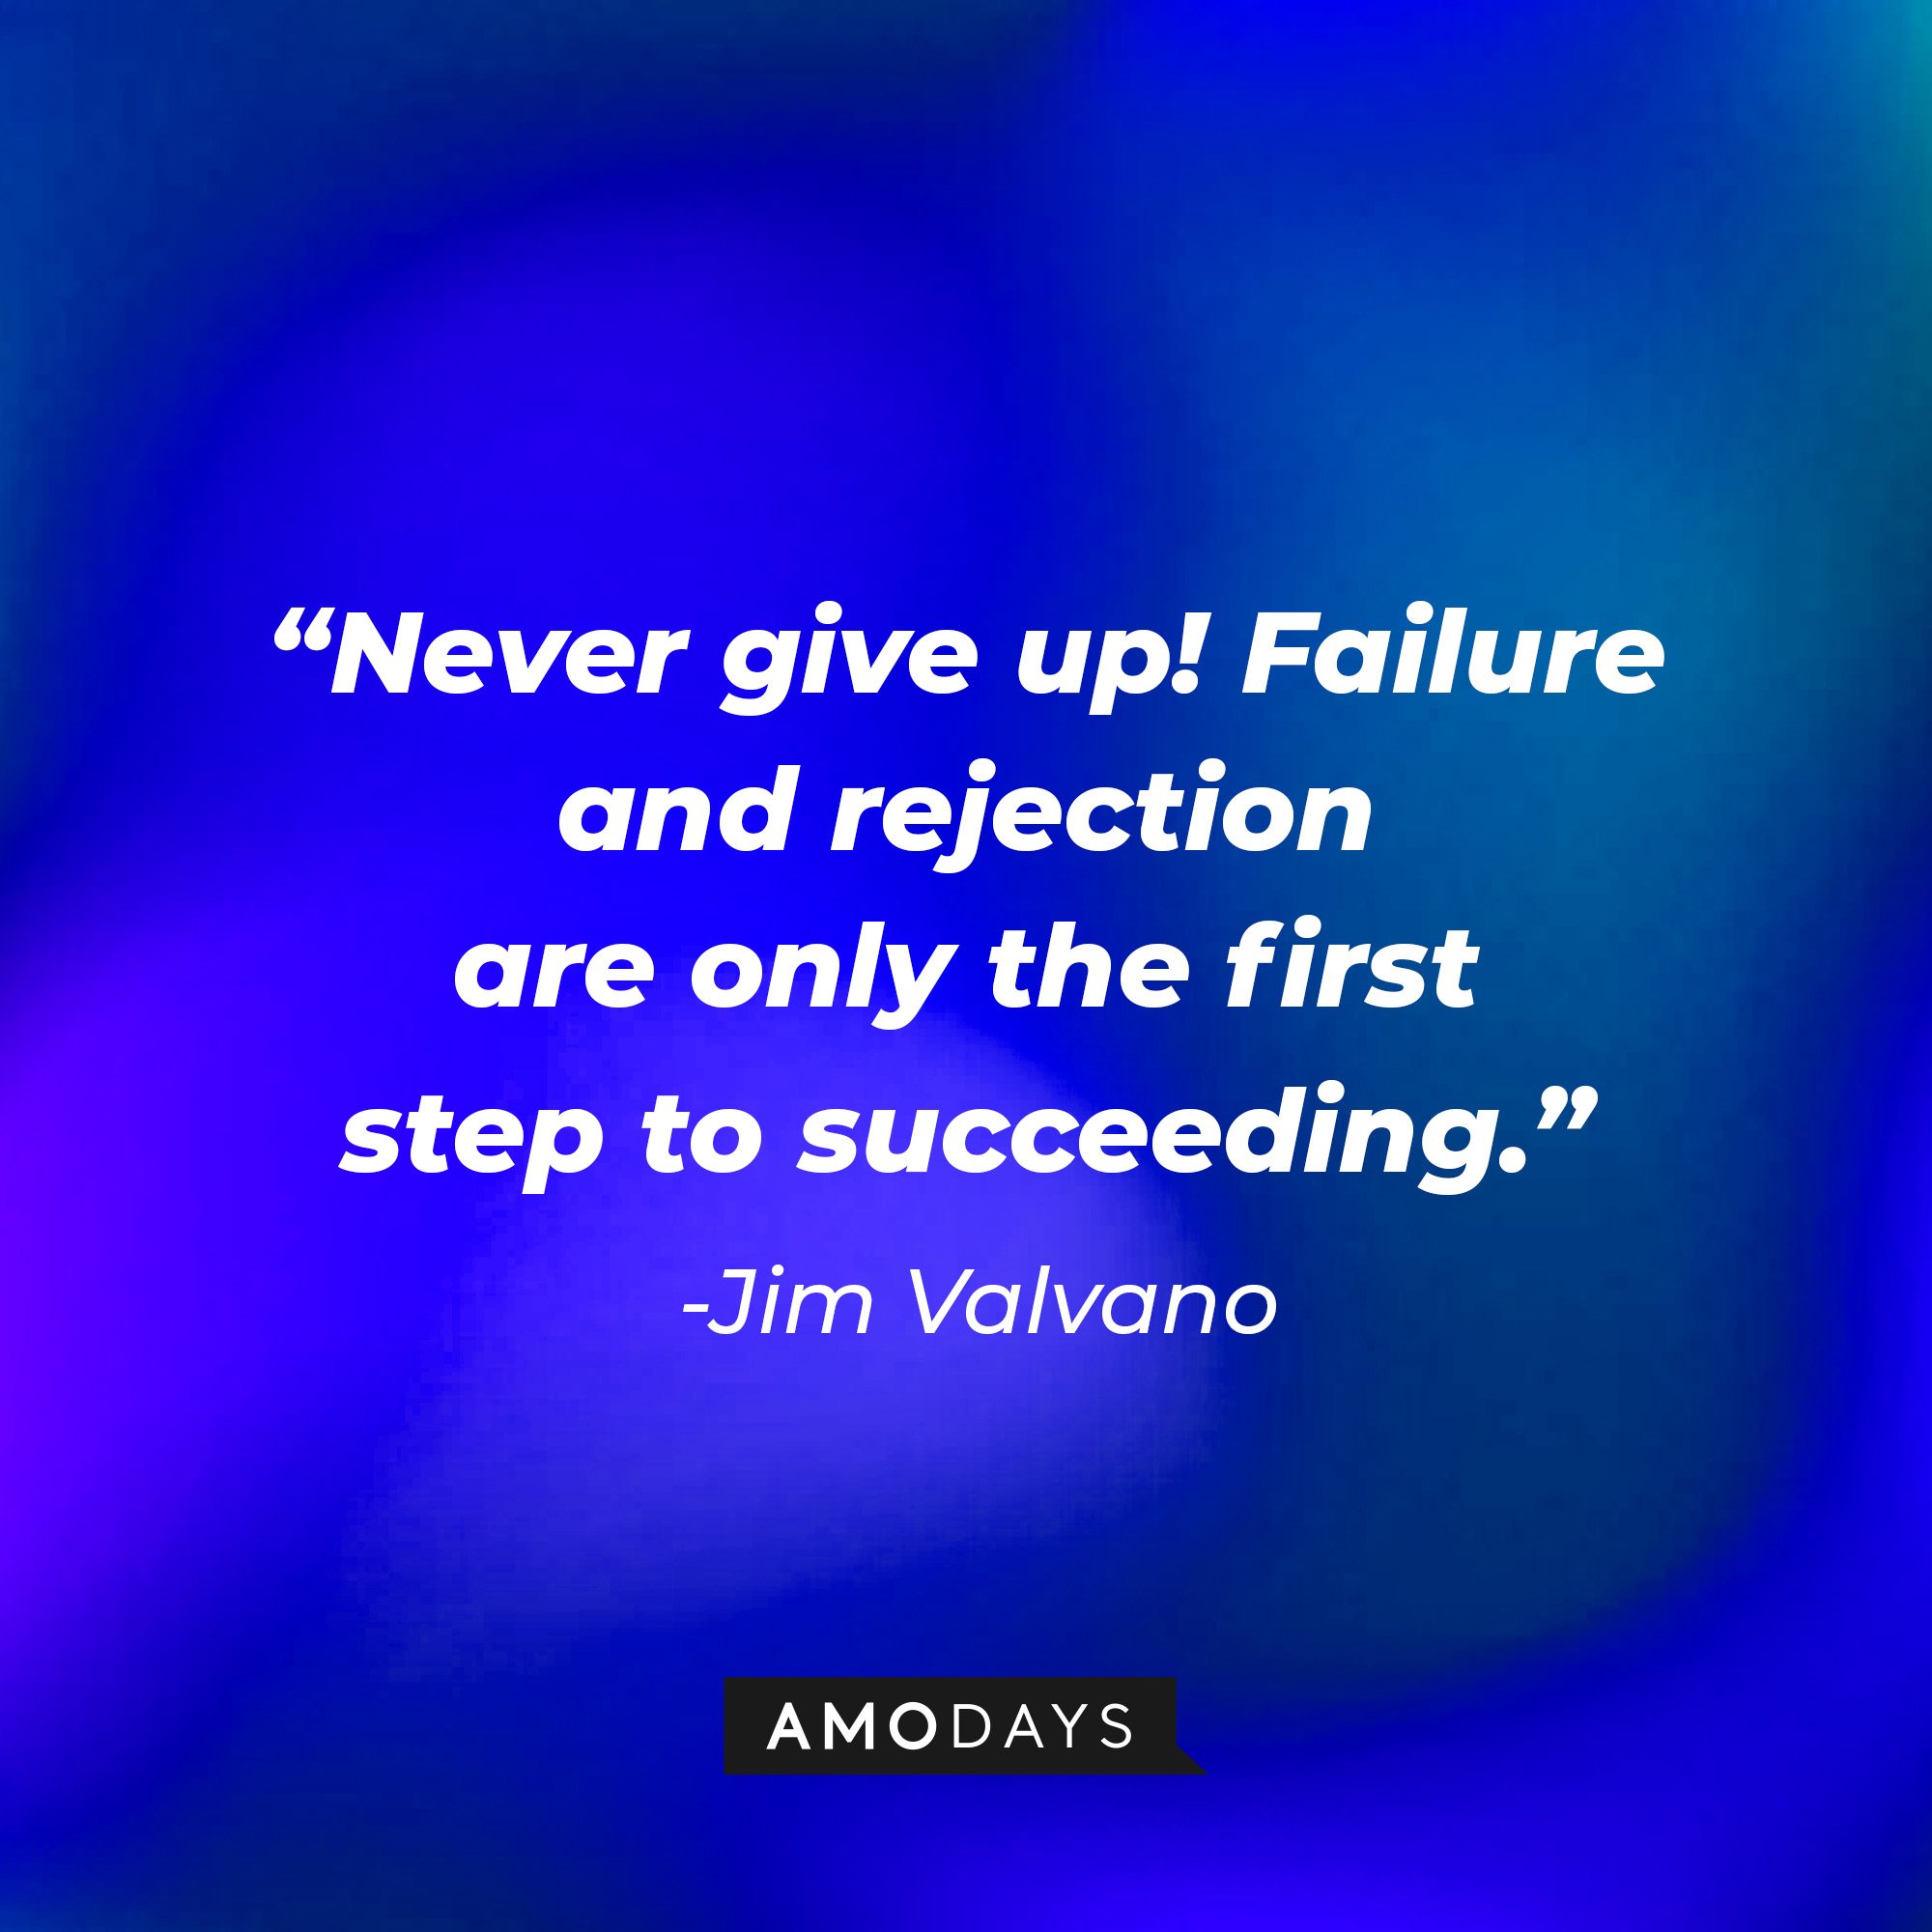  Jim Valvano’s quote: "Never give up! Failure and rejection are only the first steps to succeeding." | Image: AmoDays